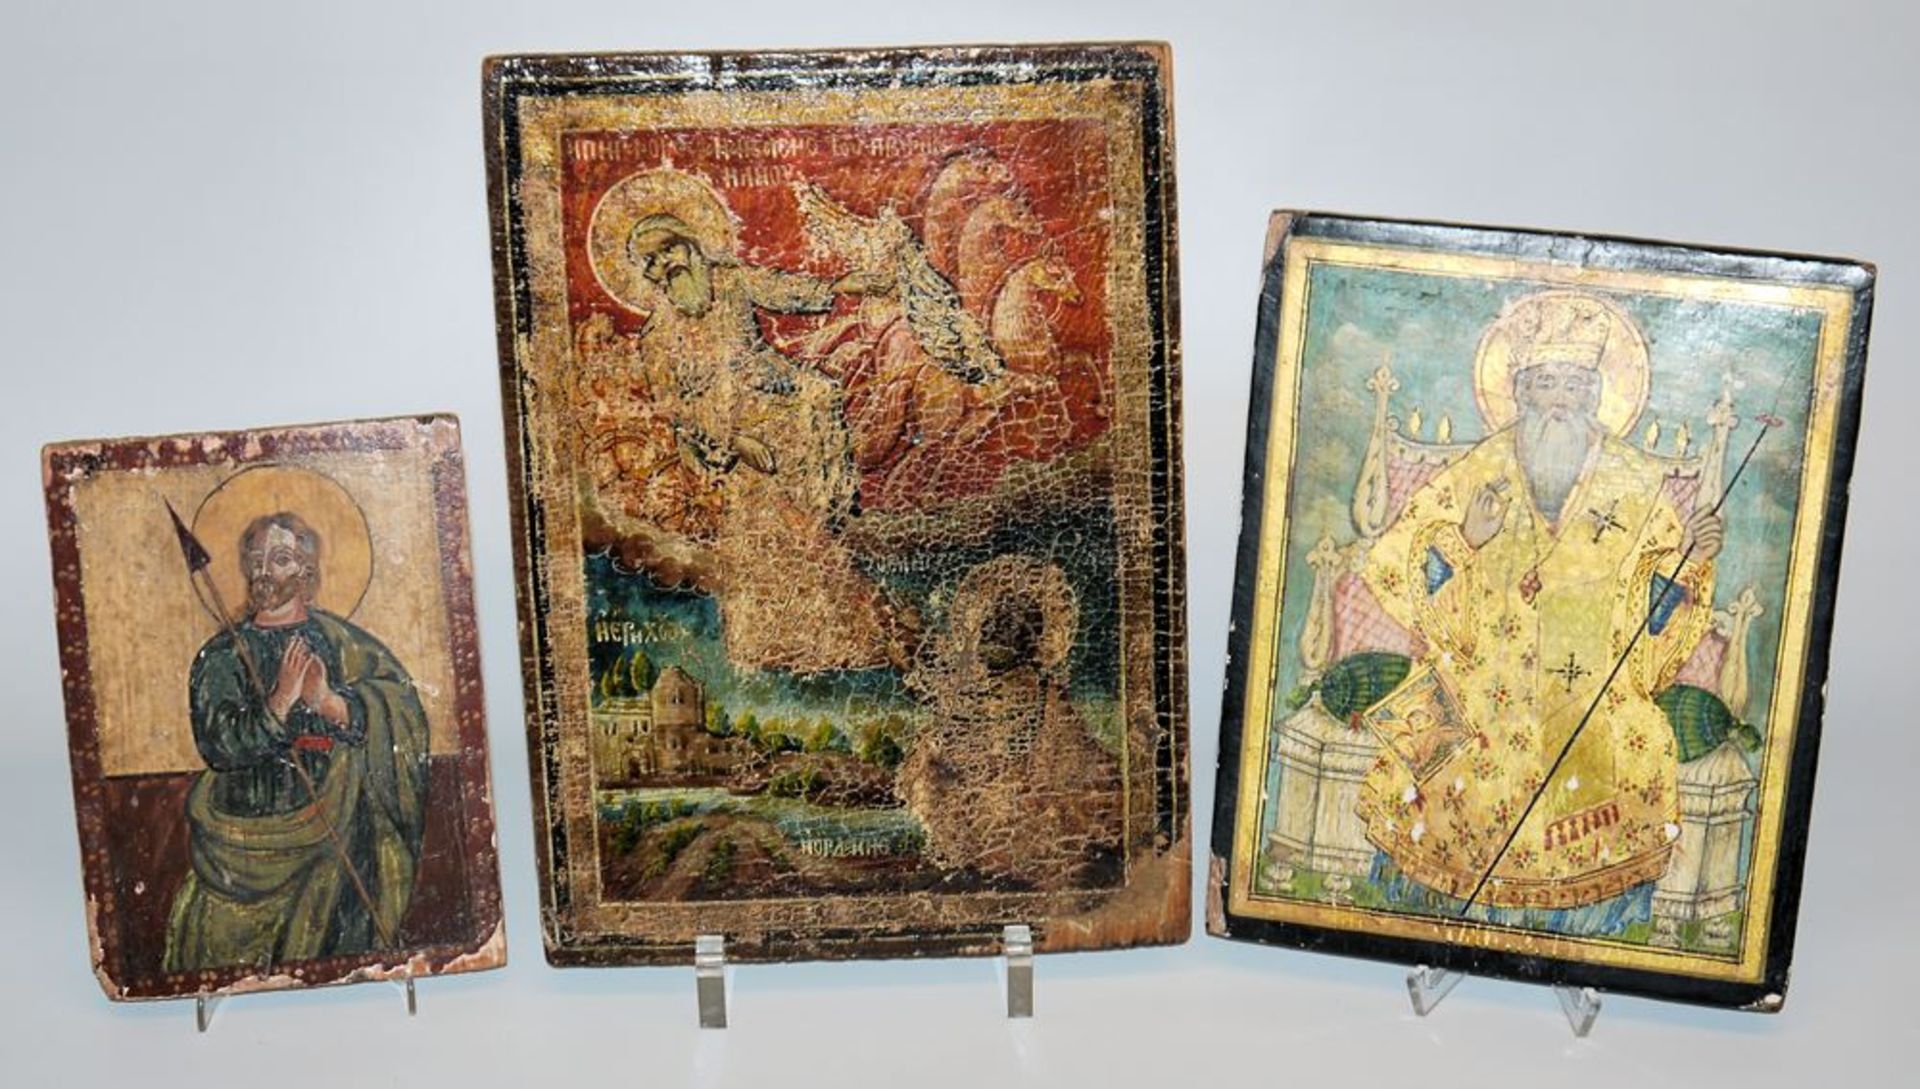 Three icons from an Orthodox monastery in Maalula, Syria, 2nd half of the 19th century